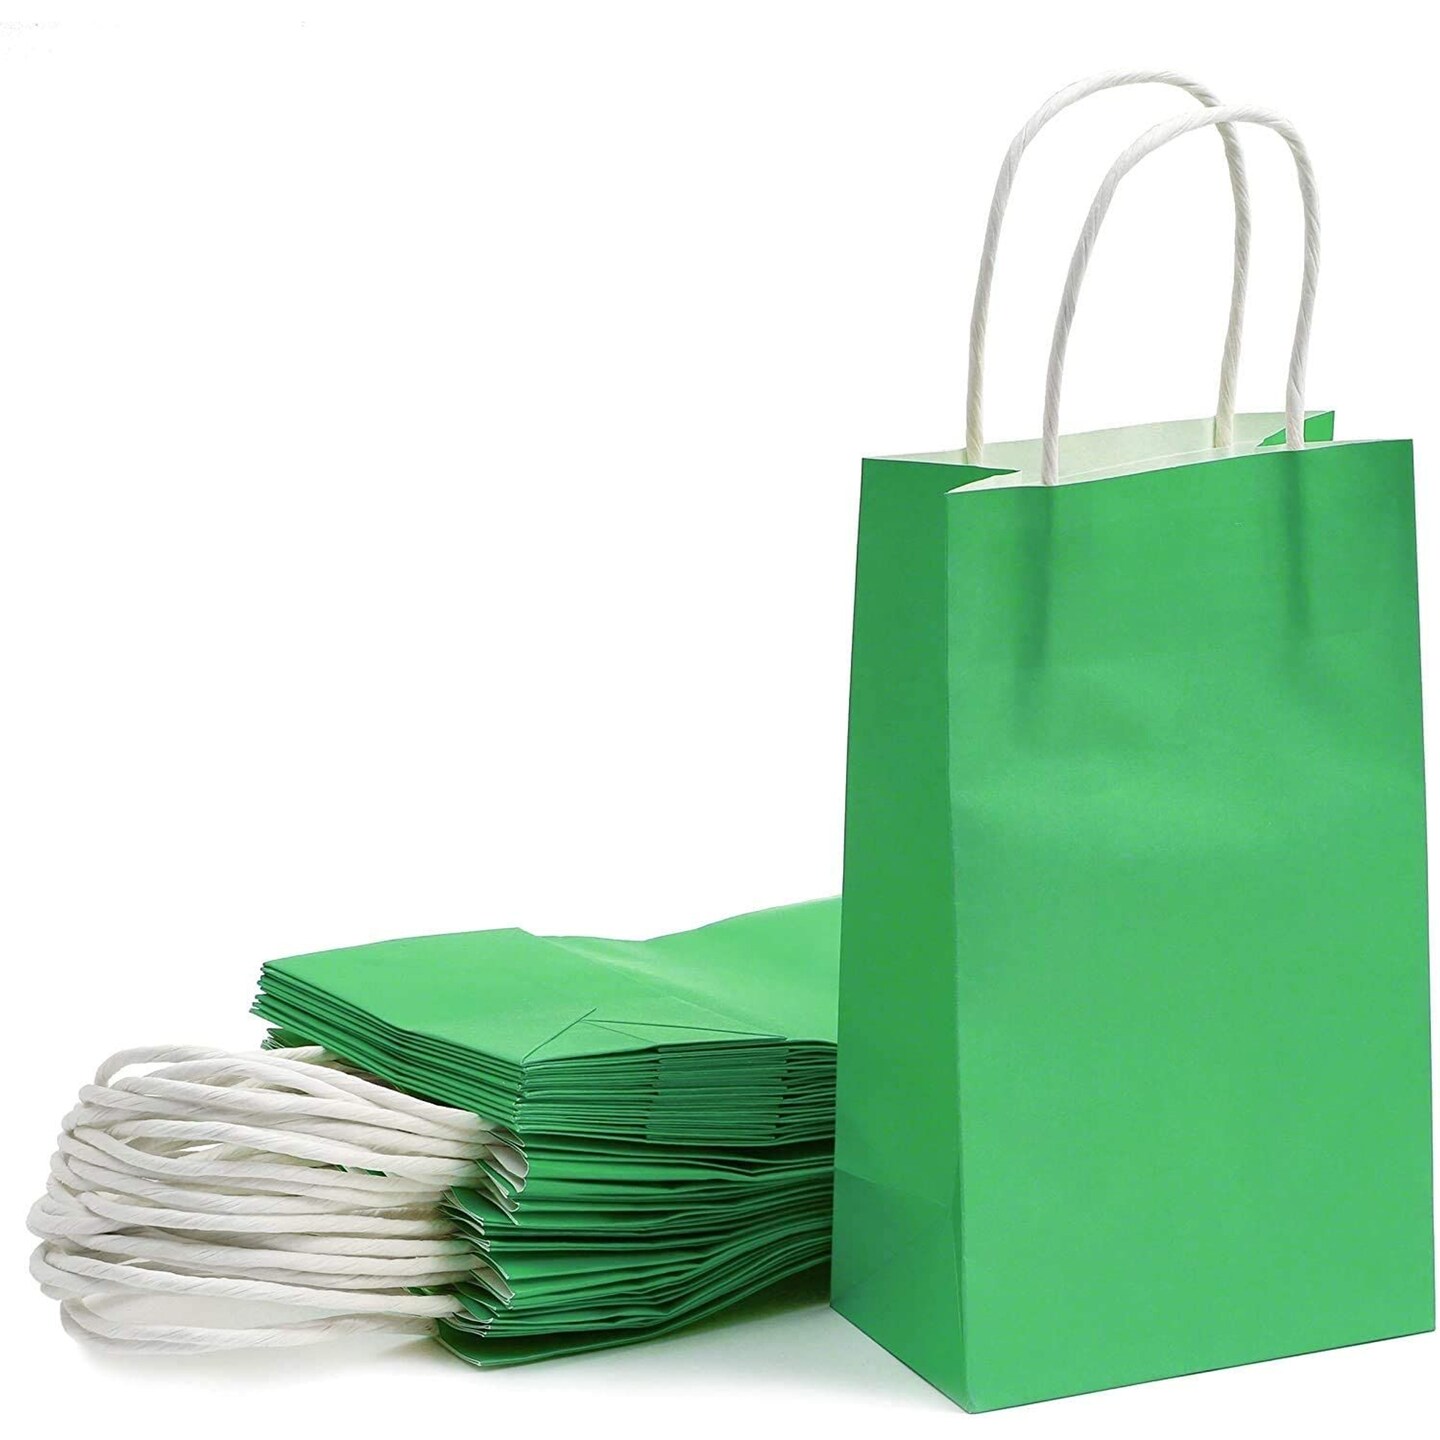 25-Pack Green Gift Bags with Handles - Small Paper Treat Bags for Birthday, Wedding, Retail (5.3x3.2x9 In)